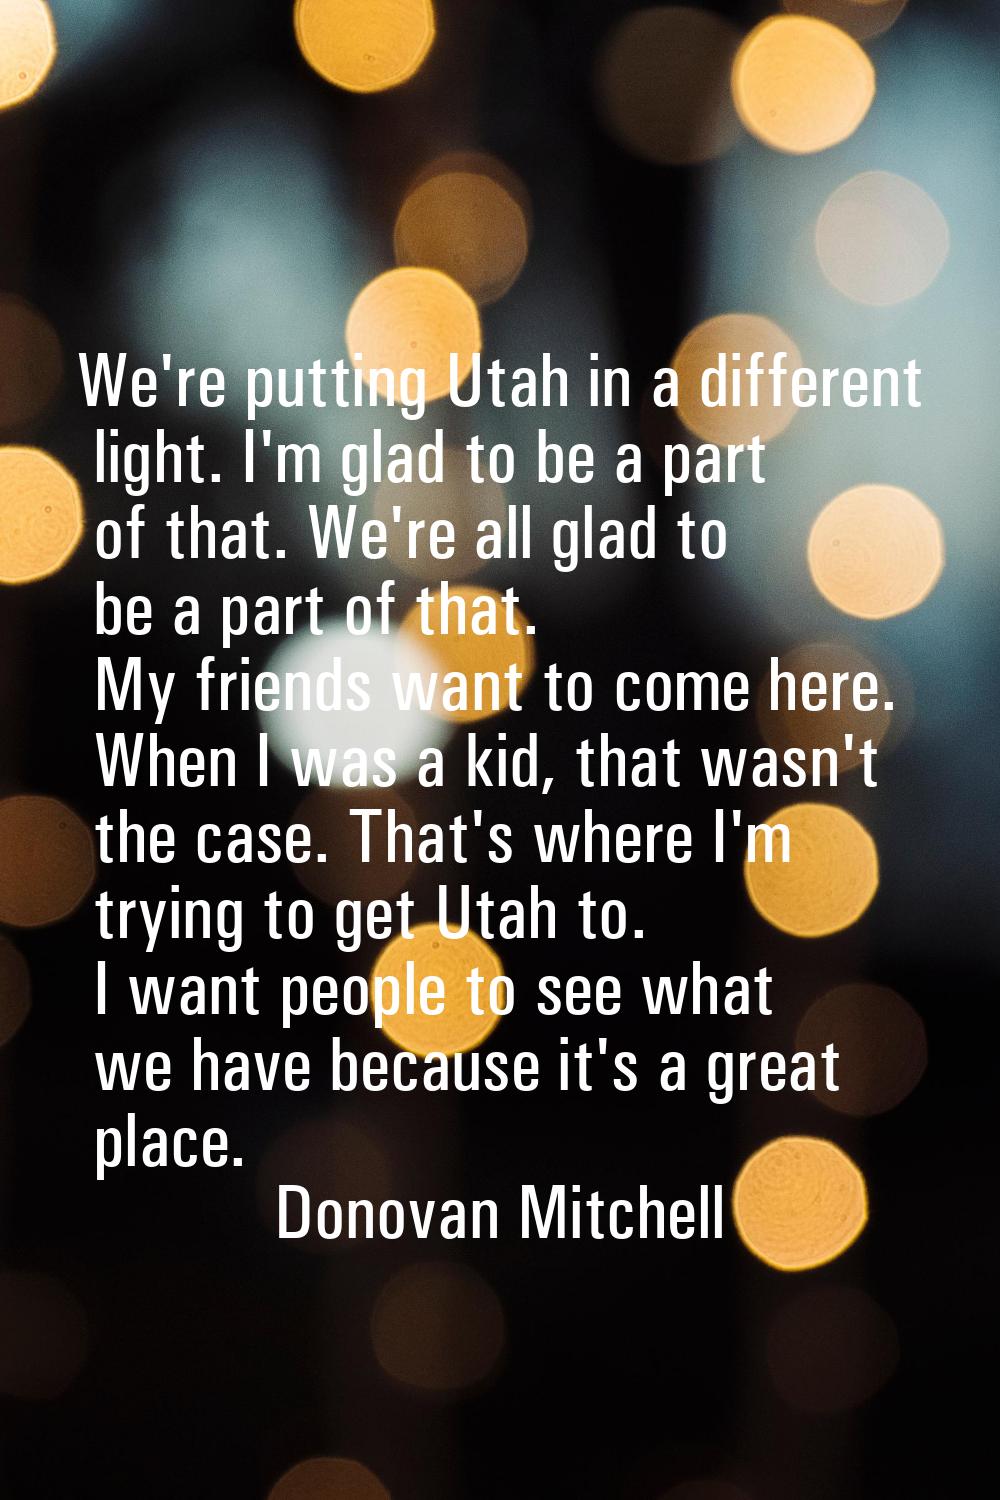 We're putting Utah in a different light. I'm glad to be a part of that. We're all glad to be a part